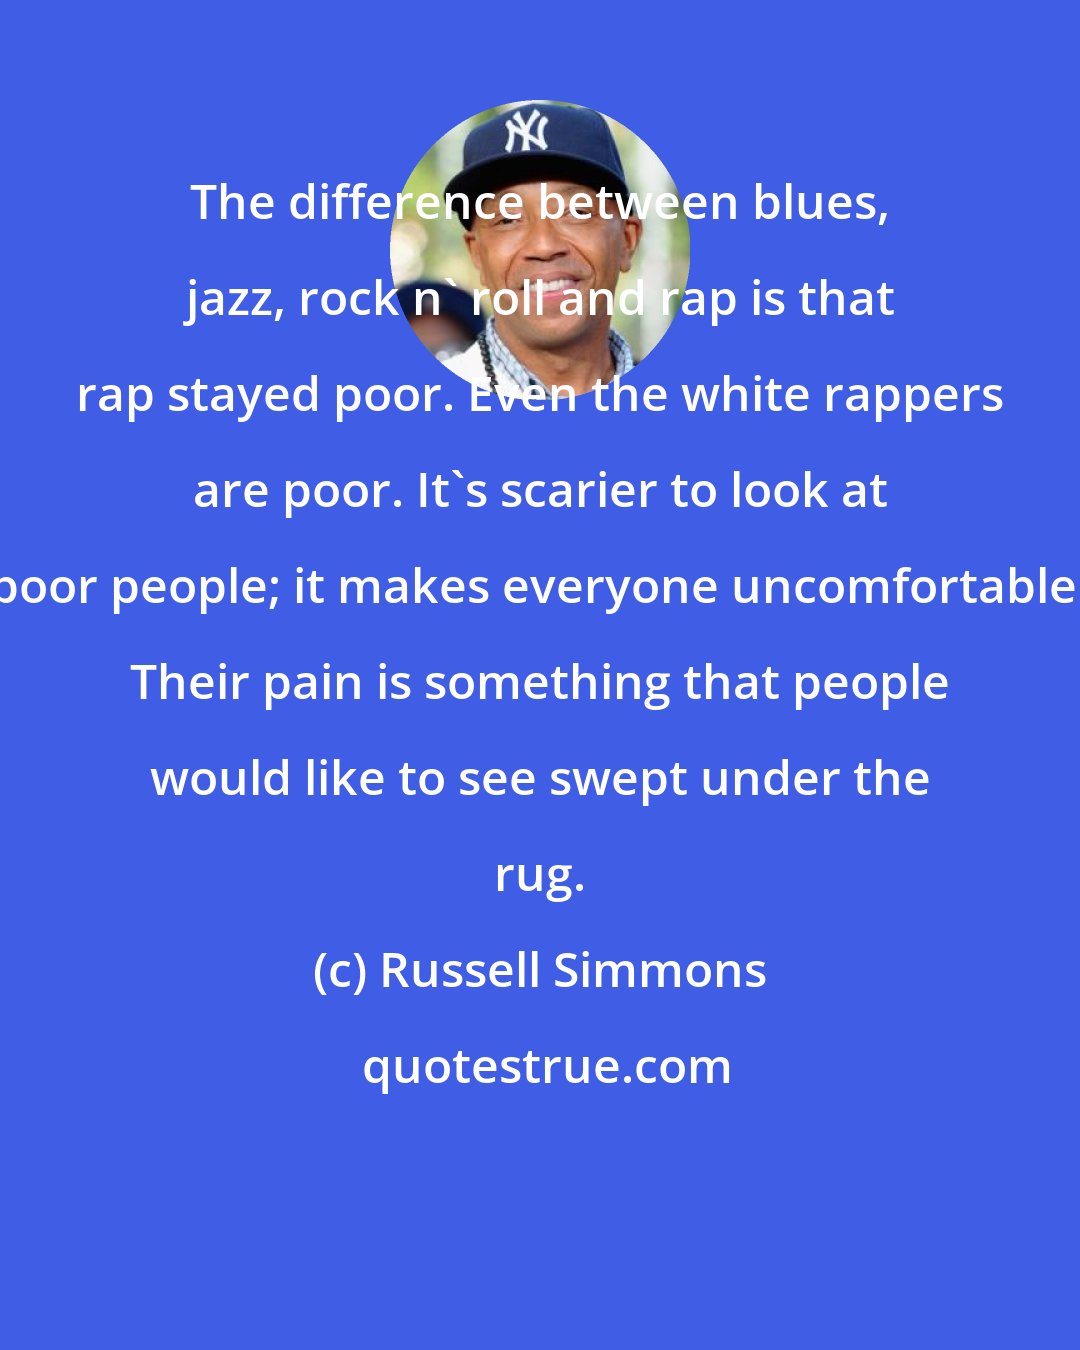 Russell Simmons: The difference between blues, jazz, rock n' roll and rap is that rap stayed poor. Even the white rappers are poor. It's scarier to look at poor people; it makes everyone uncomfortable. Their pain is something that people would like to see swept under the rug.